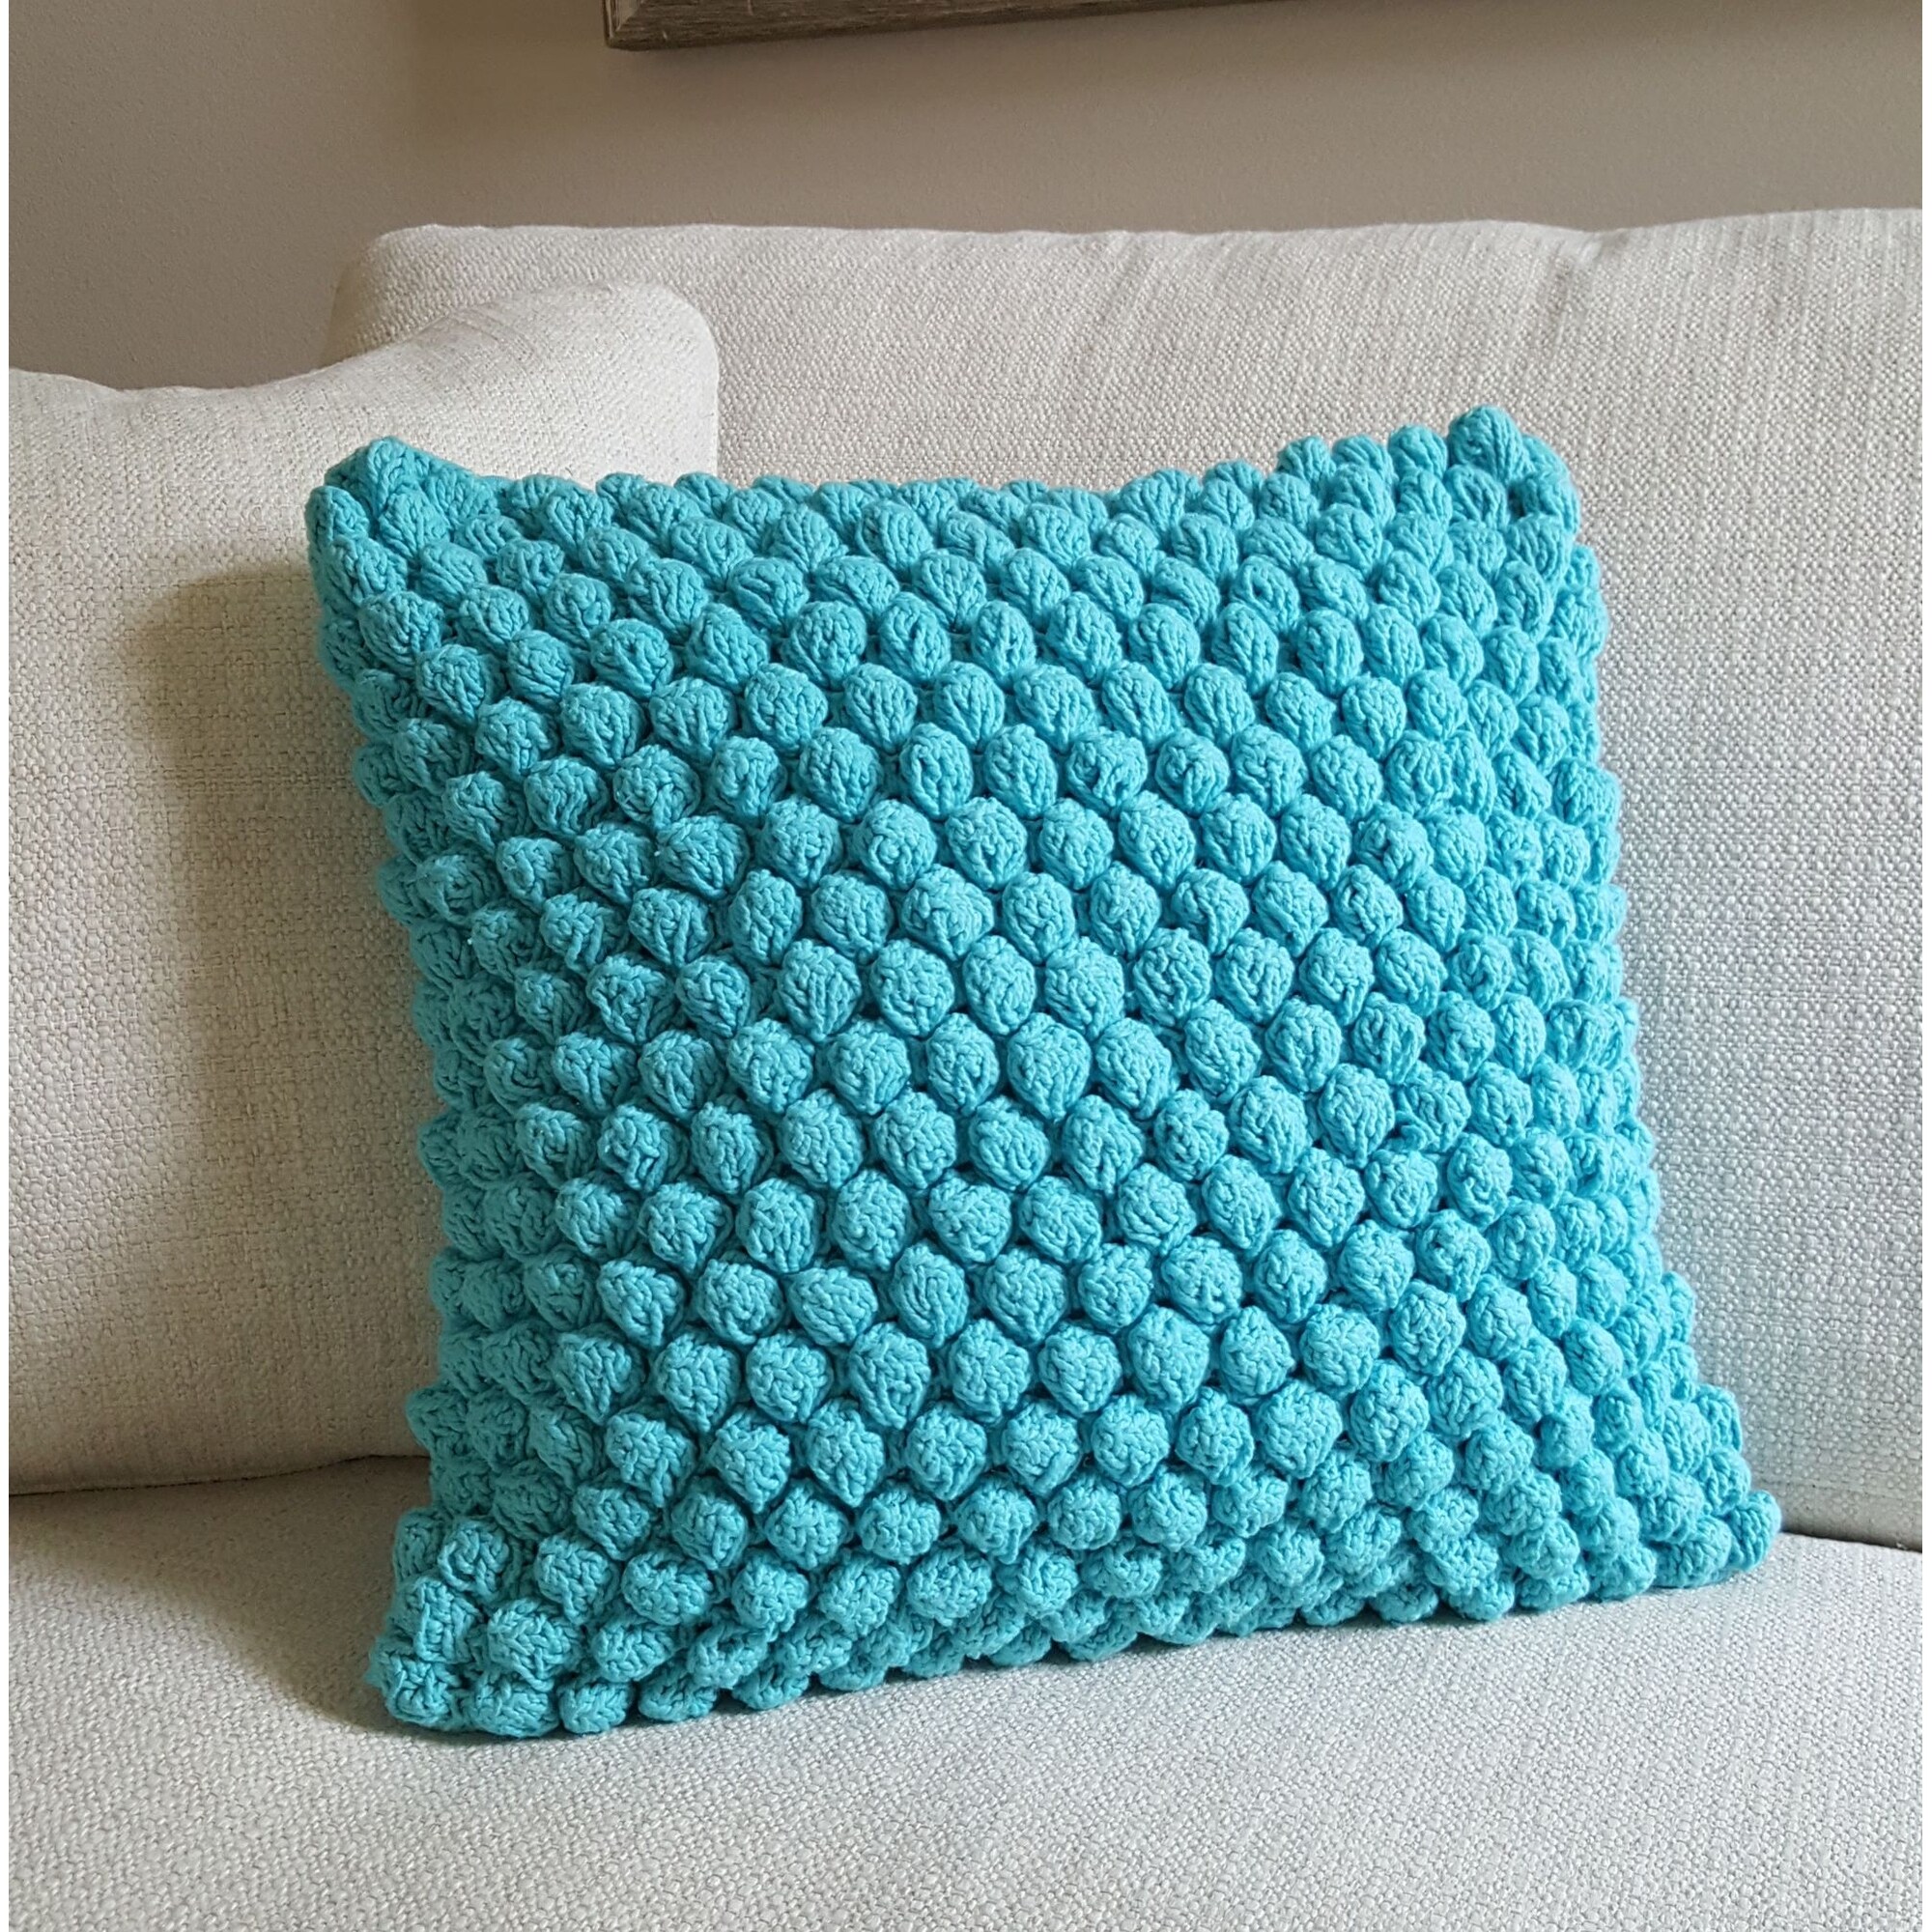 https://ak1.ostkcdn.com/images/products/is/images/direct/a8983b76ea00a5c96ab0ff4d11ce781d631bd036/Orbit-Ball-Cotton-18-Inch-Decorative-Throw-Pillow.jpg